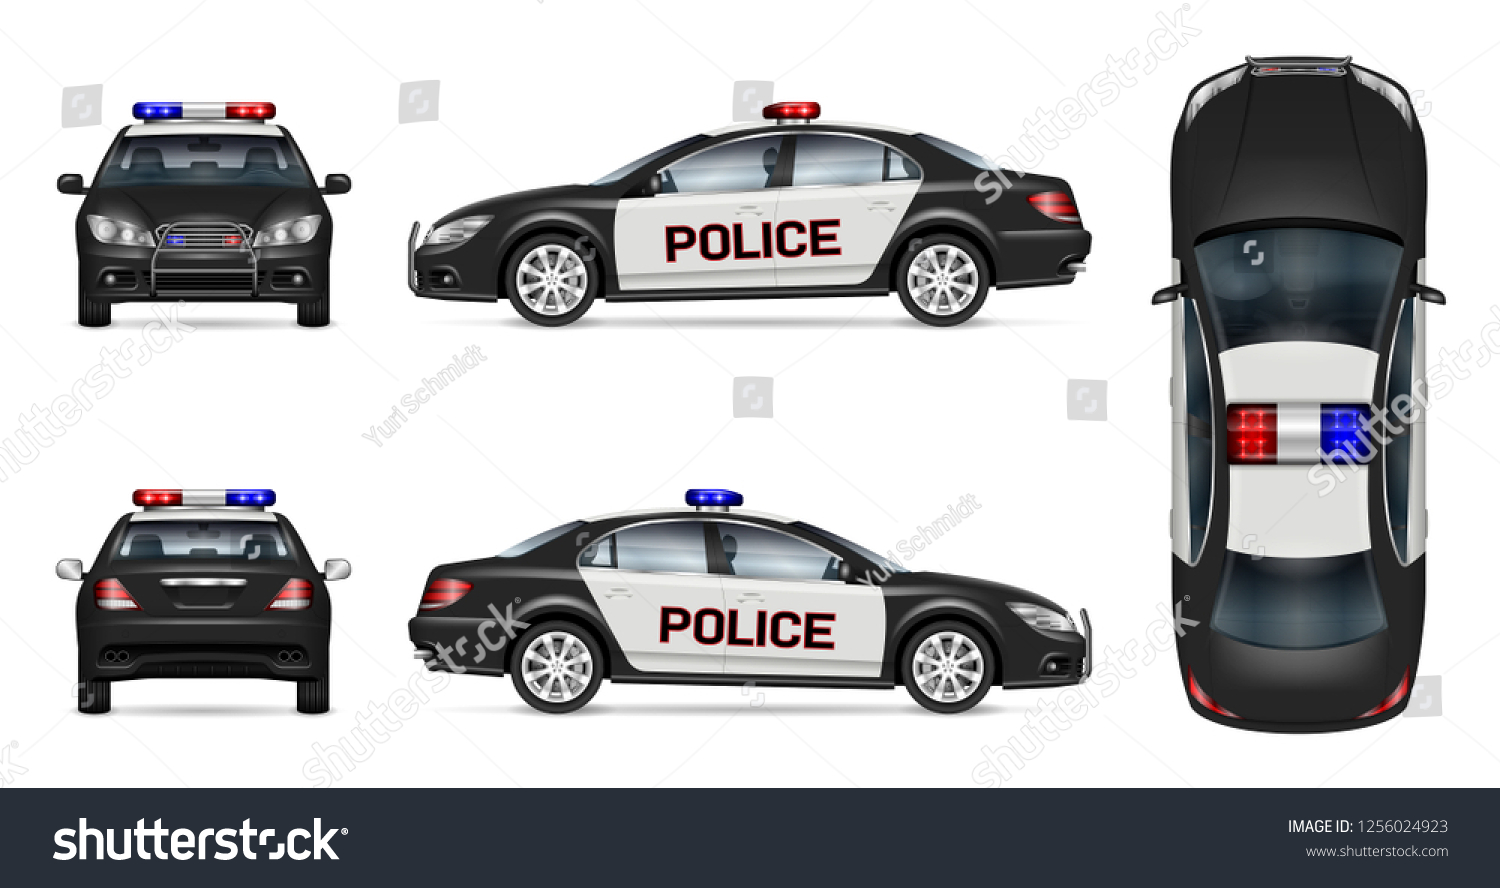 SVG of Police car vector mockup on white background, view from side, front, back and top. All elements in the groups on separate layers for easy editing and recolor svg